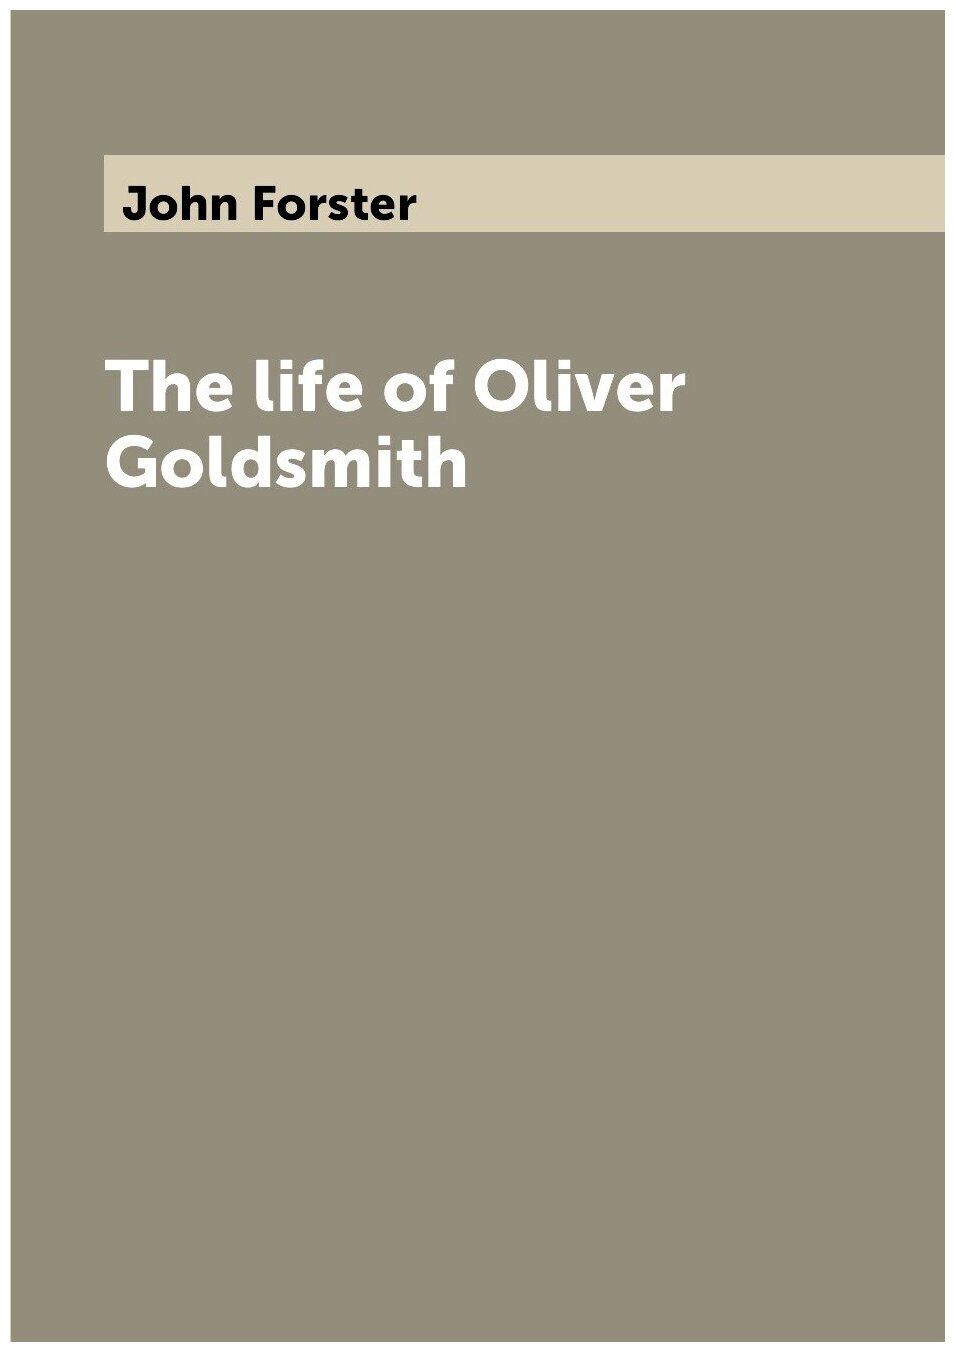 The life of Oliver Goldsmith